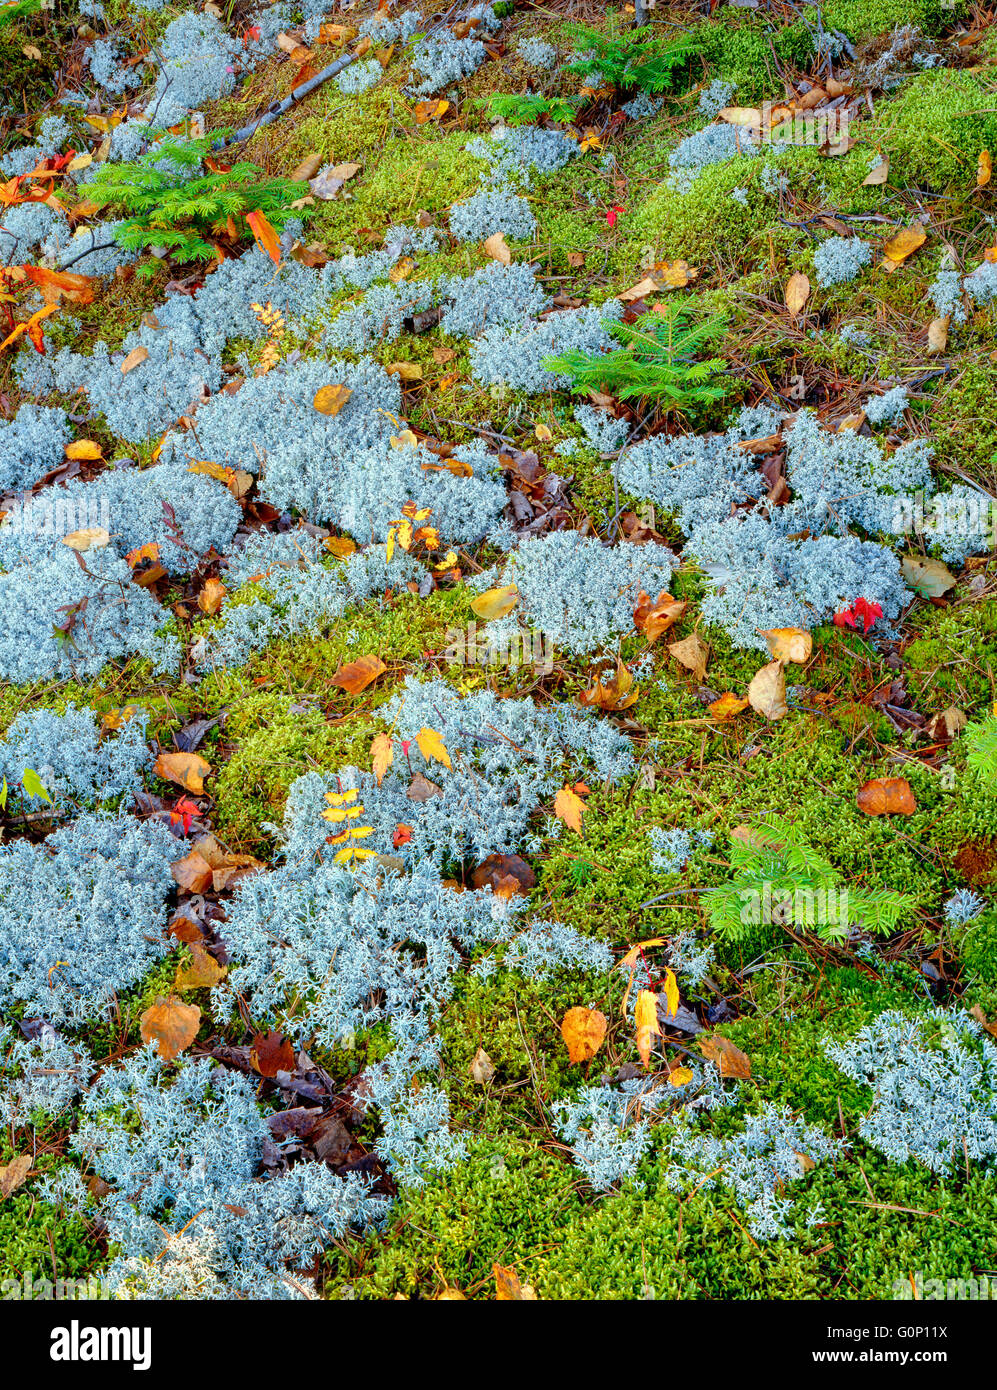 USA, Michigan, Pictured Rocks National Lakeshore, Groundcover scene with lichen, moss and Balsam fir saplings (Abies balsamea). Stock Photo